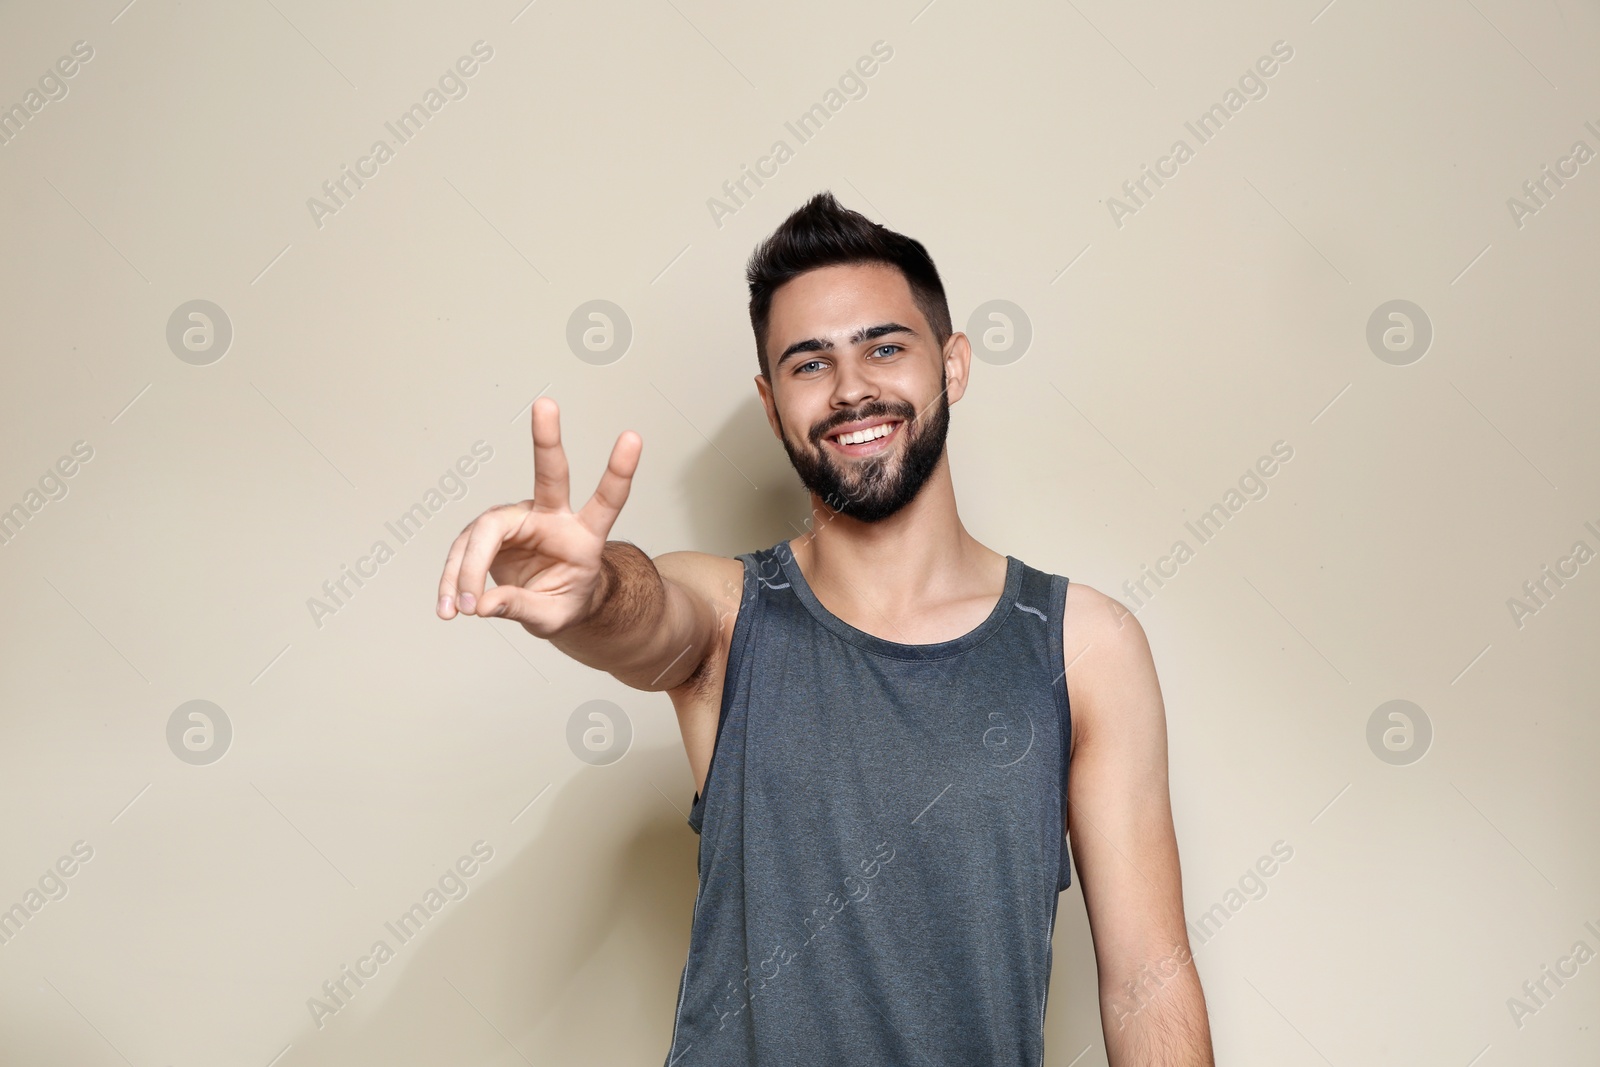 Photo of Happy young man showing victory gesture on color background